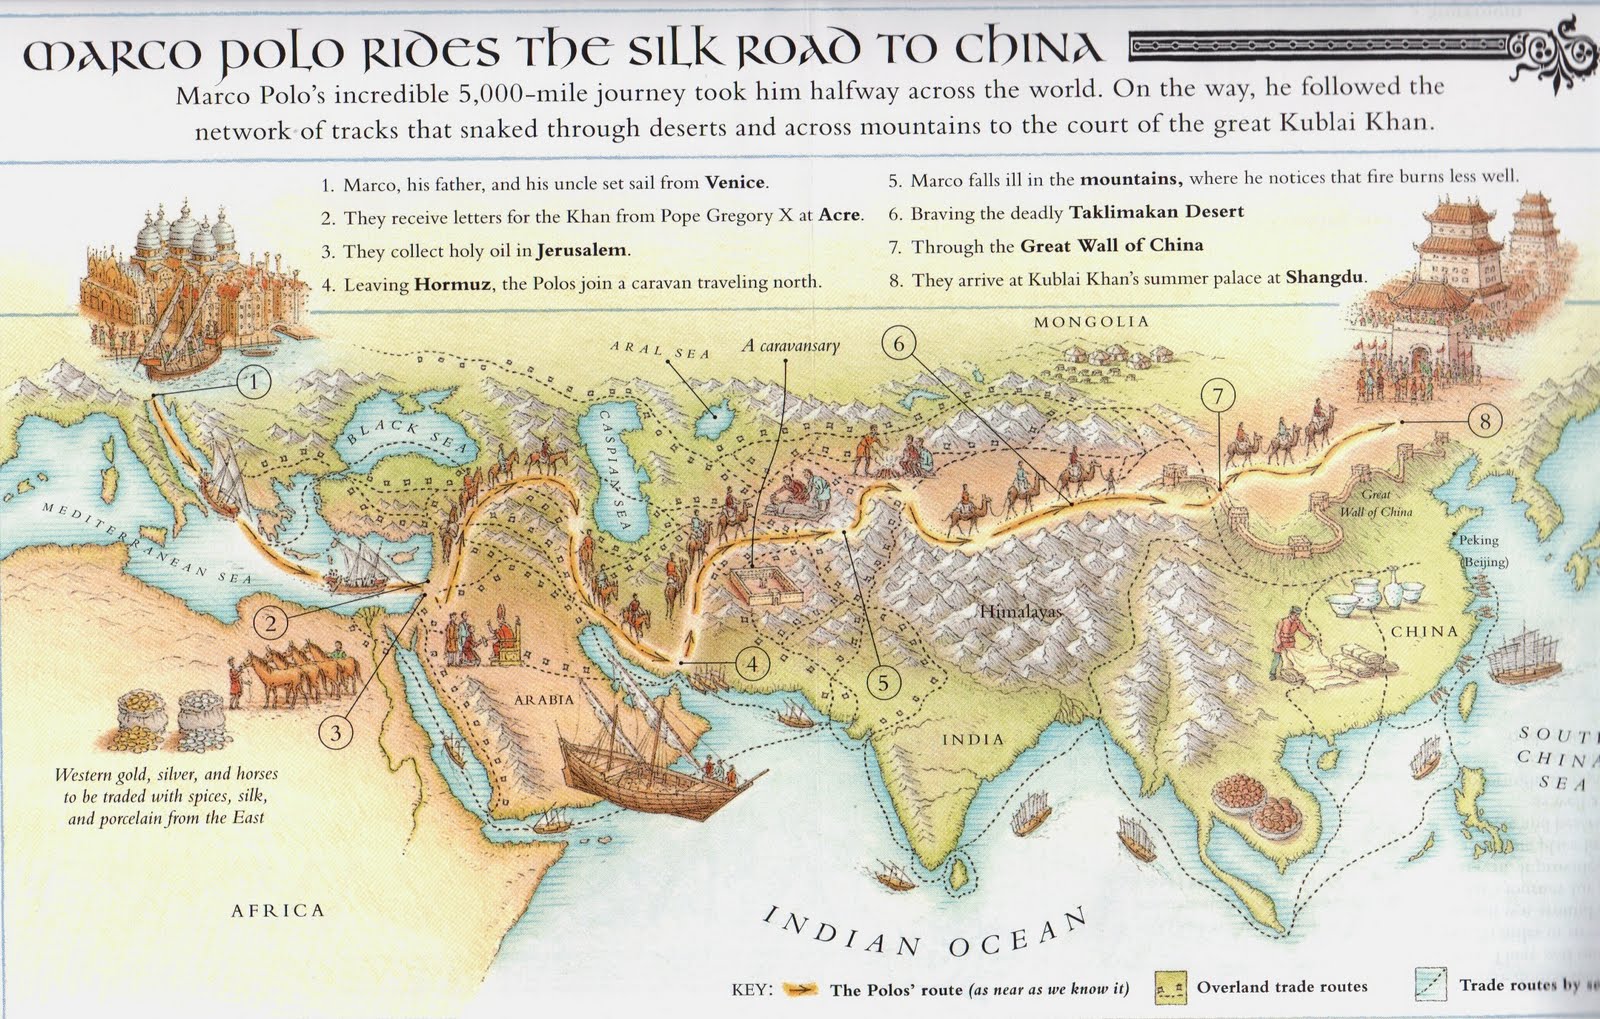 How did Marco Polo change the world?